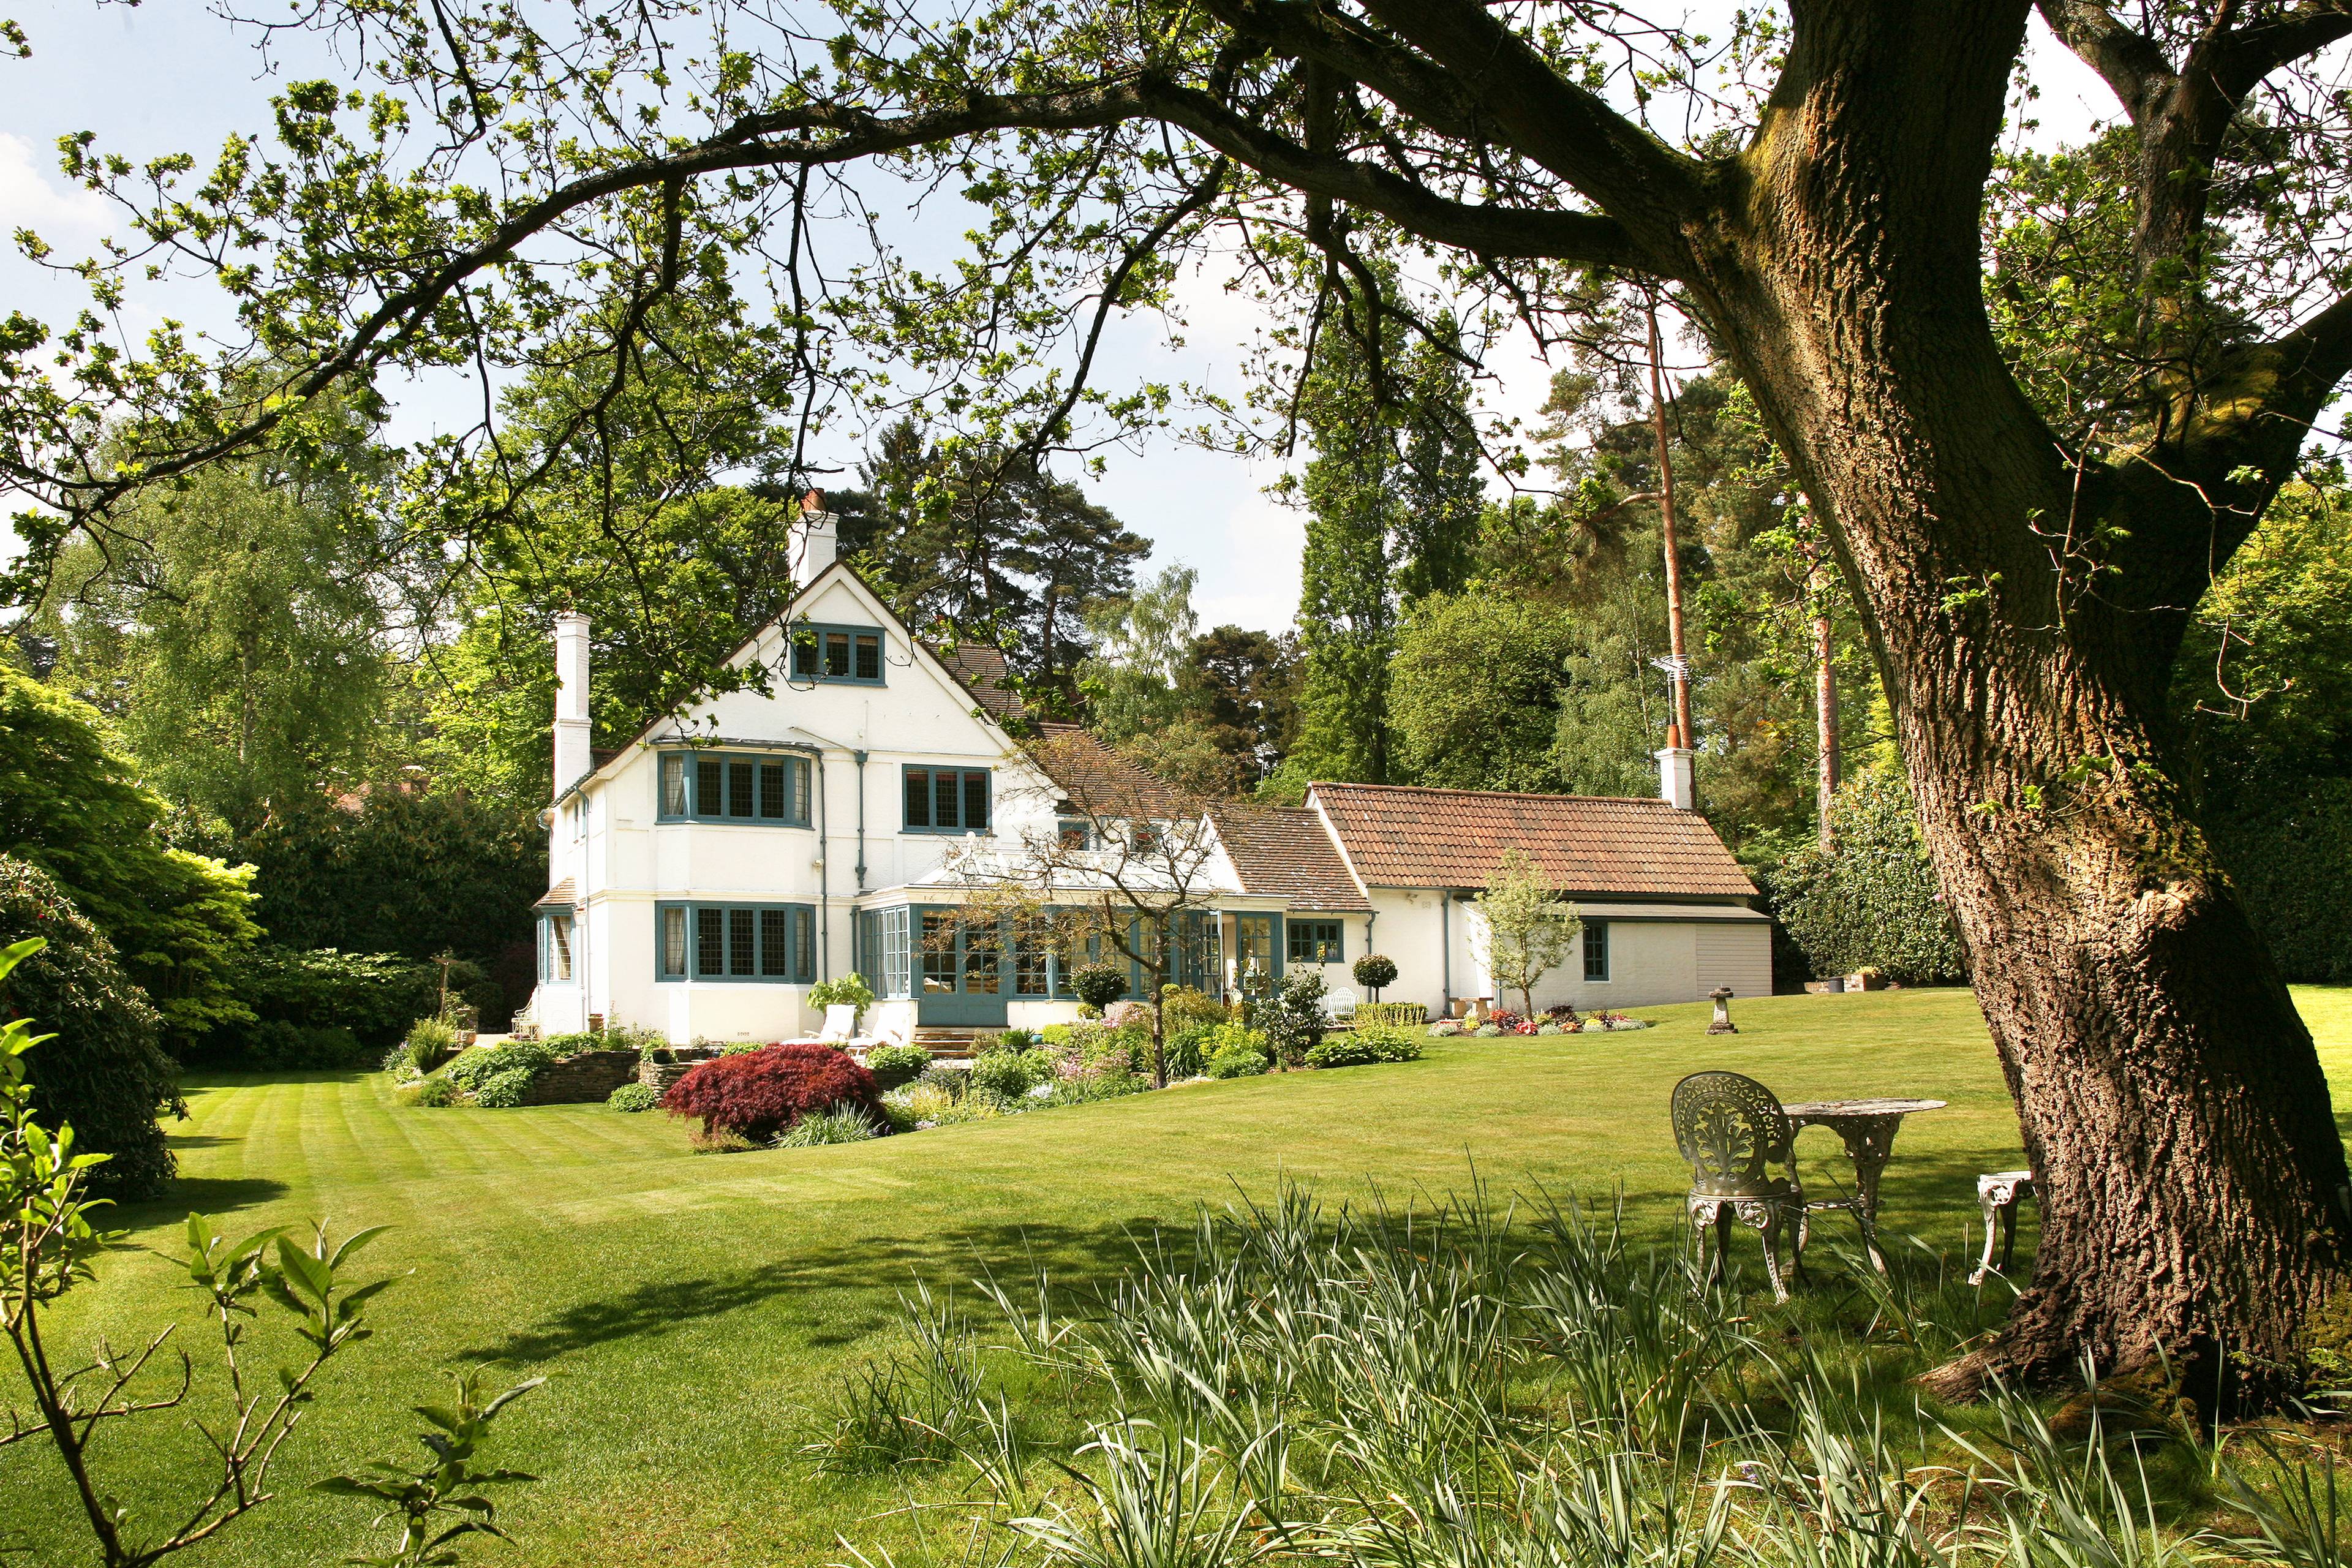 Outstanding period home with stunning mature and private gardens